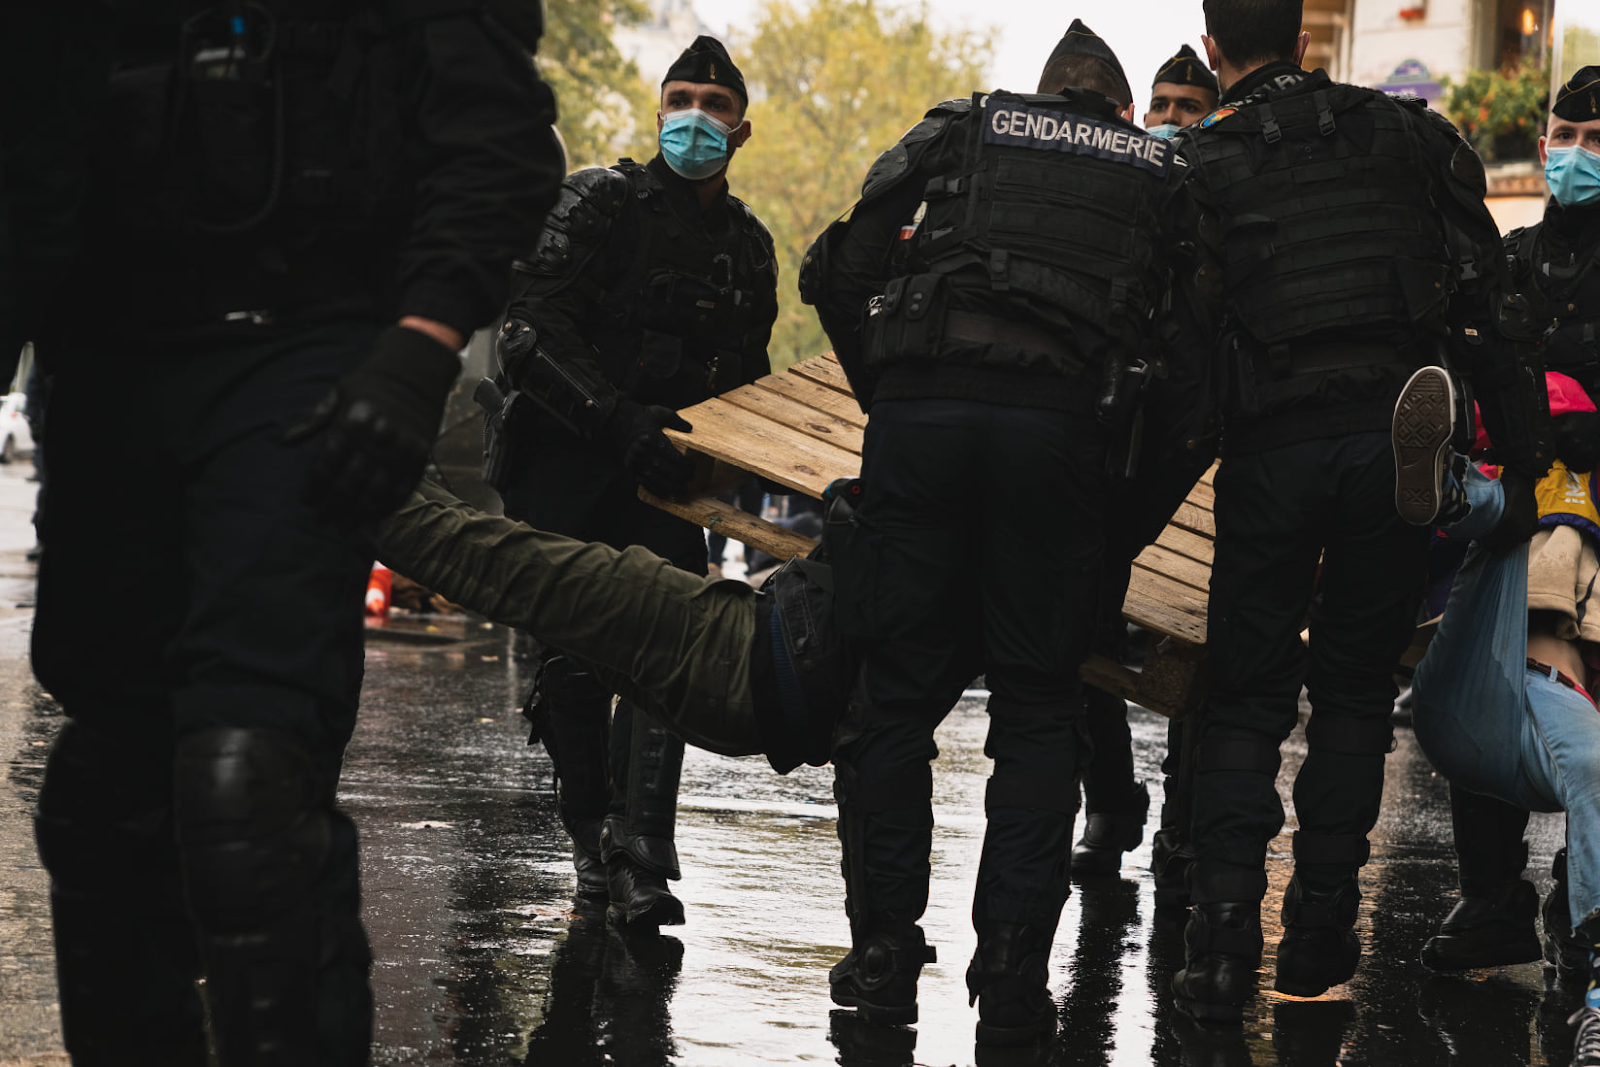 Rebels “violently resisting” arrest according to French police.